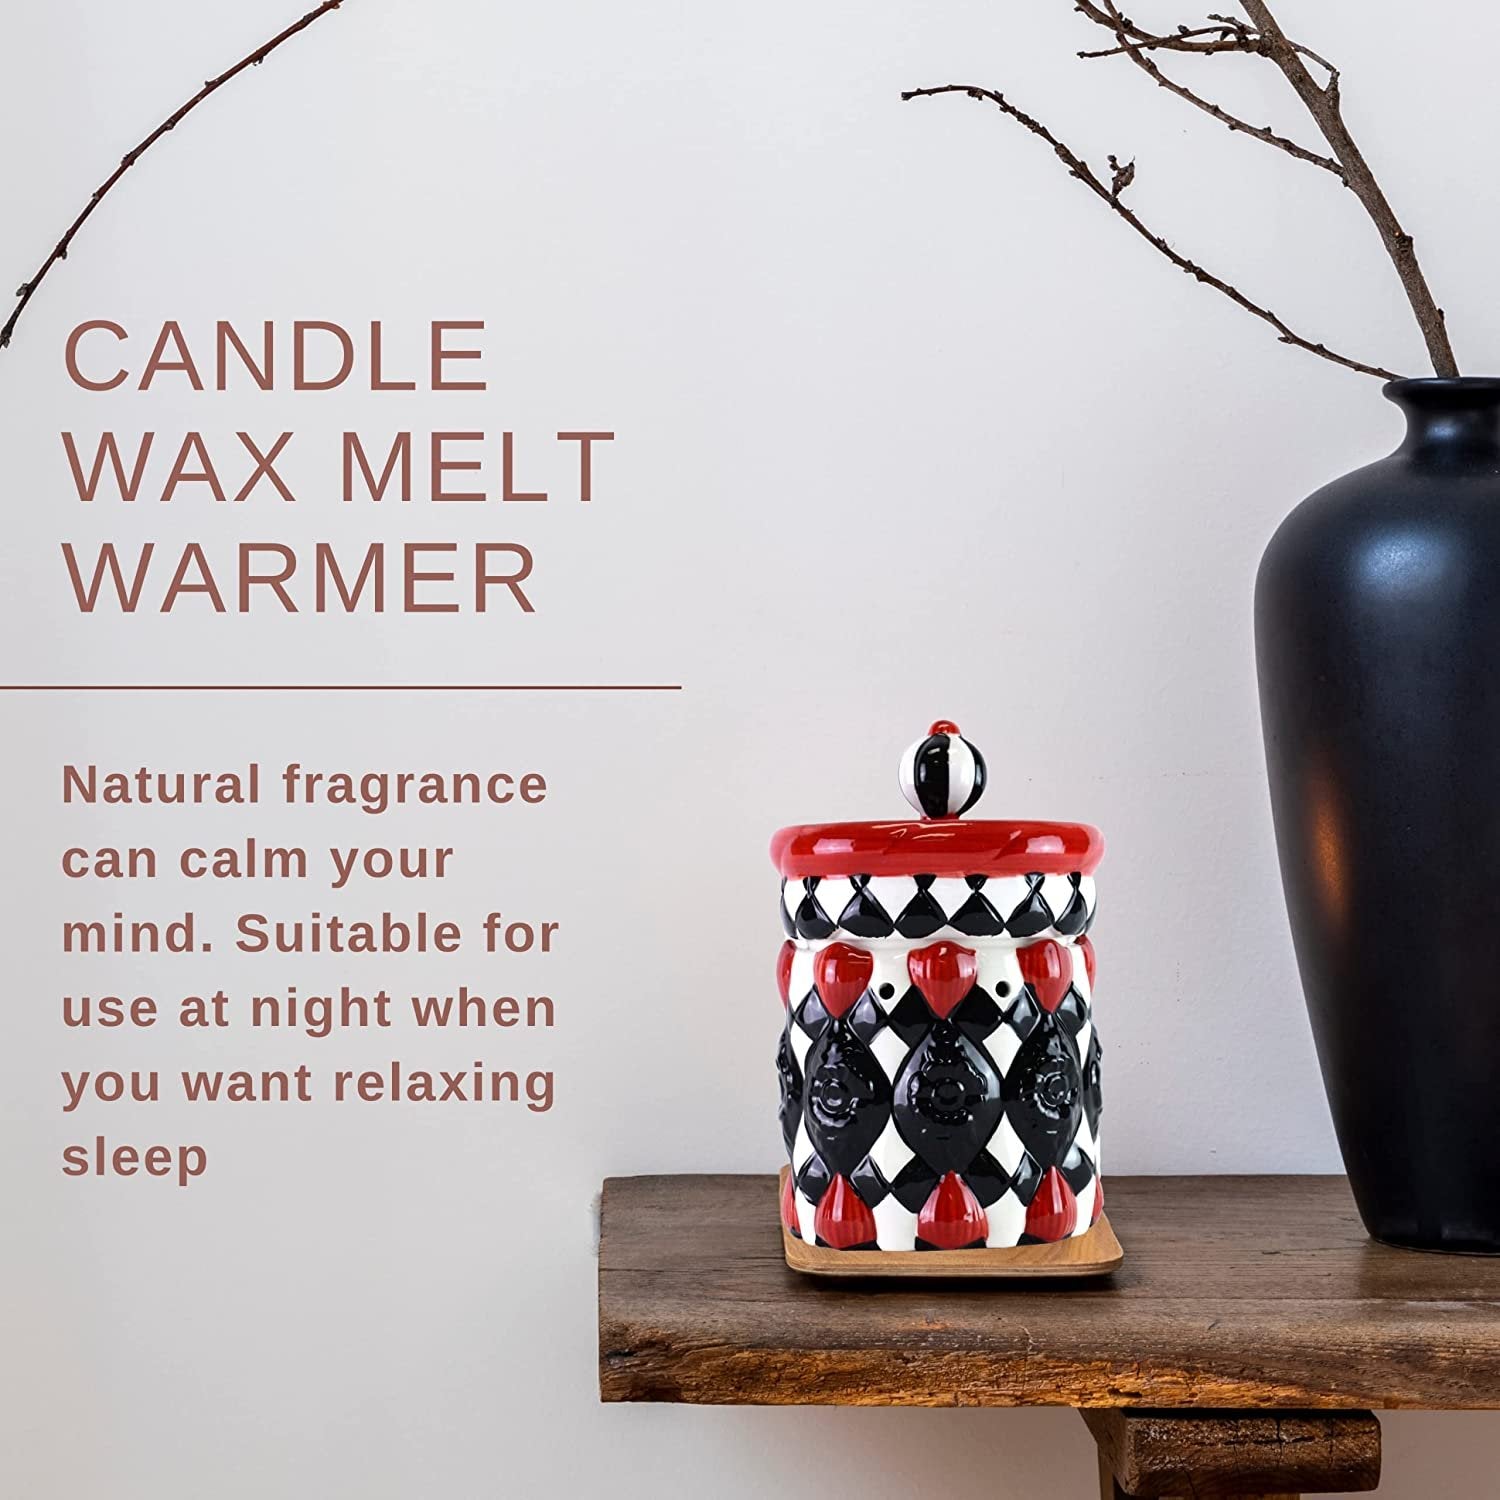 Fragrance and Wax Melt Warmers